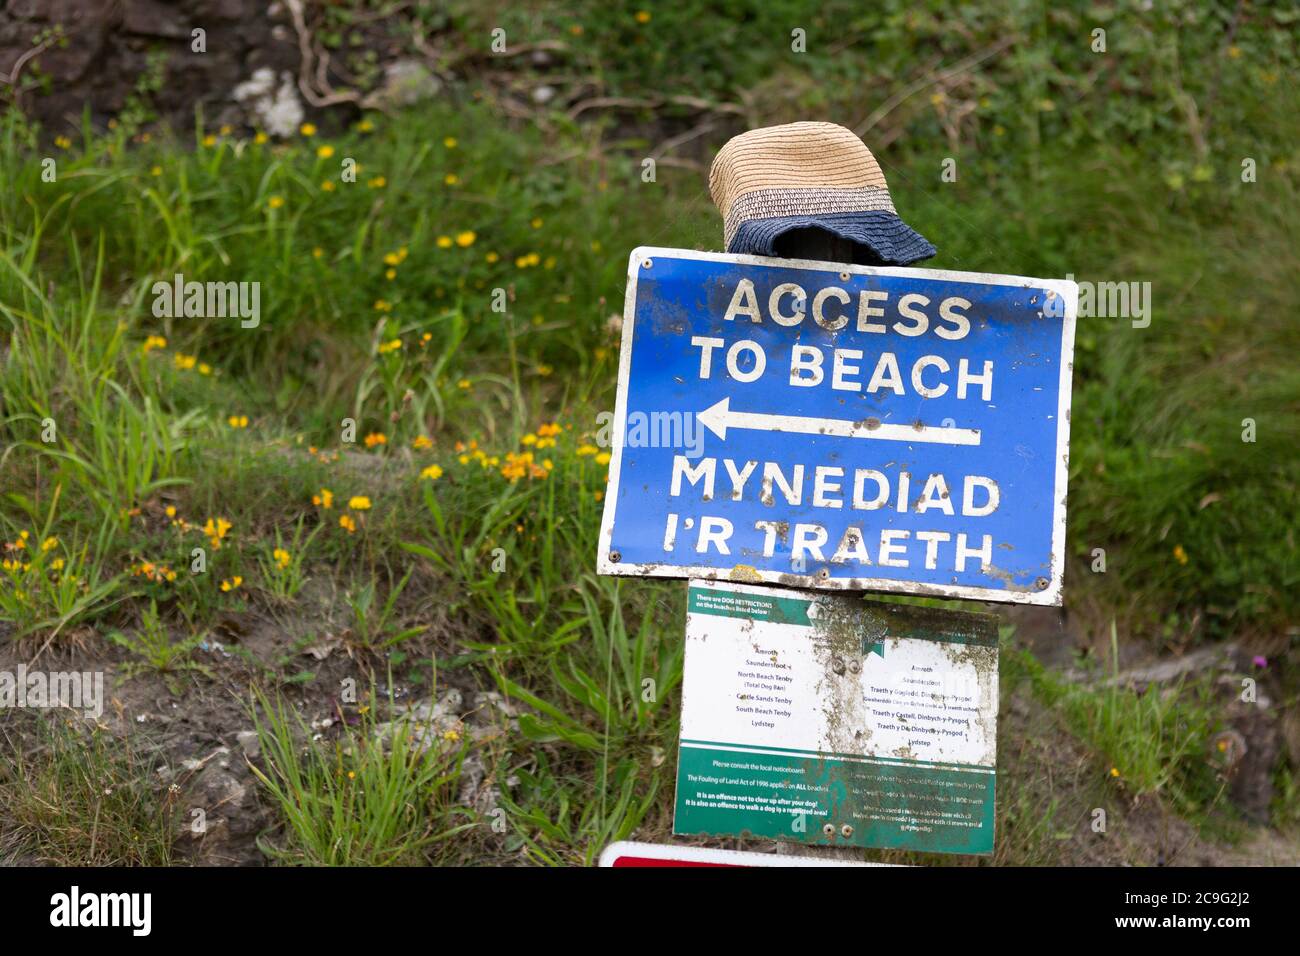 Bilingual sign in Welsh and English pointing to the entrance to a beach in Wales, with sun hat placed on top. Stock Photo